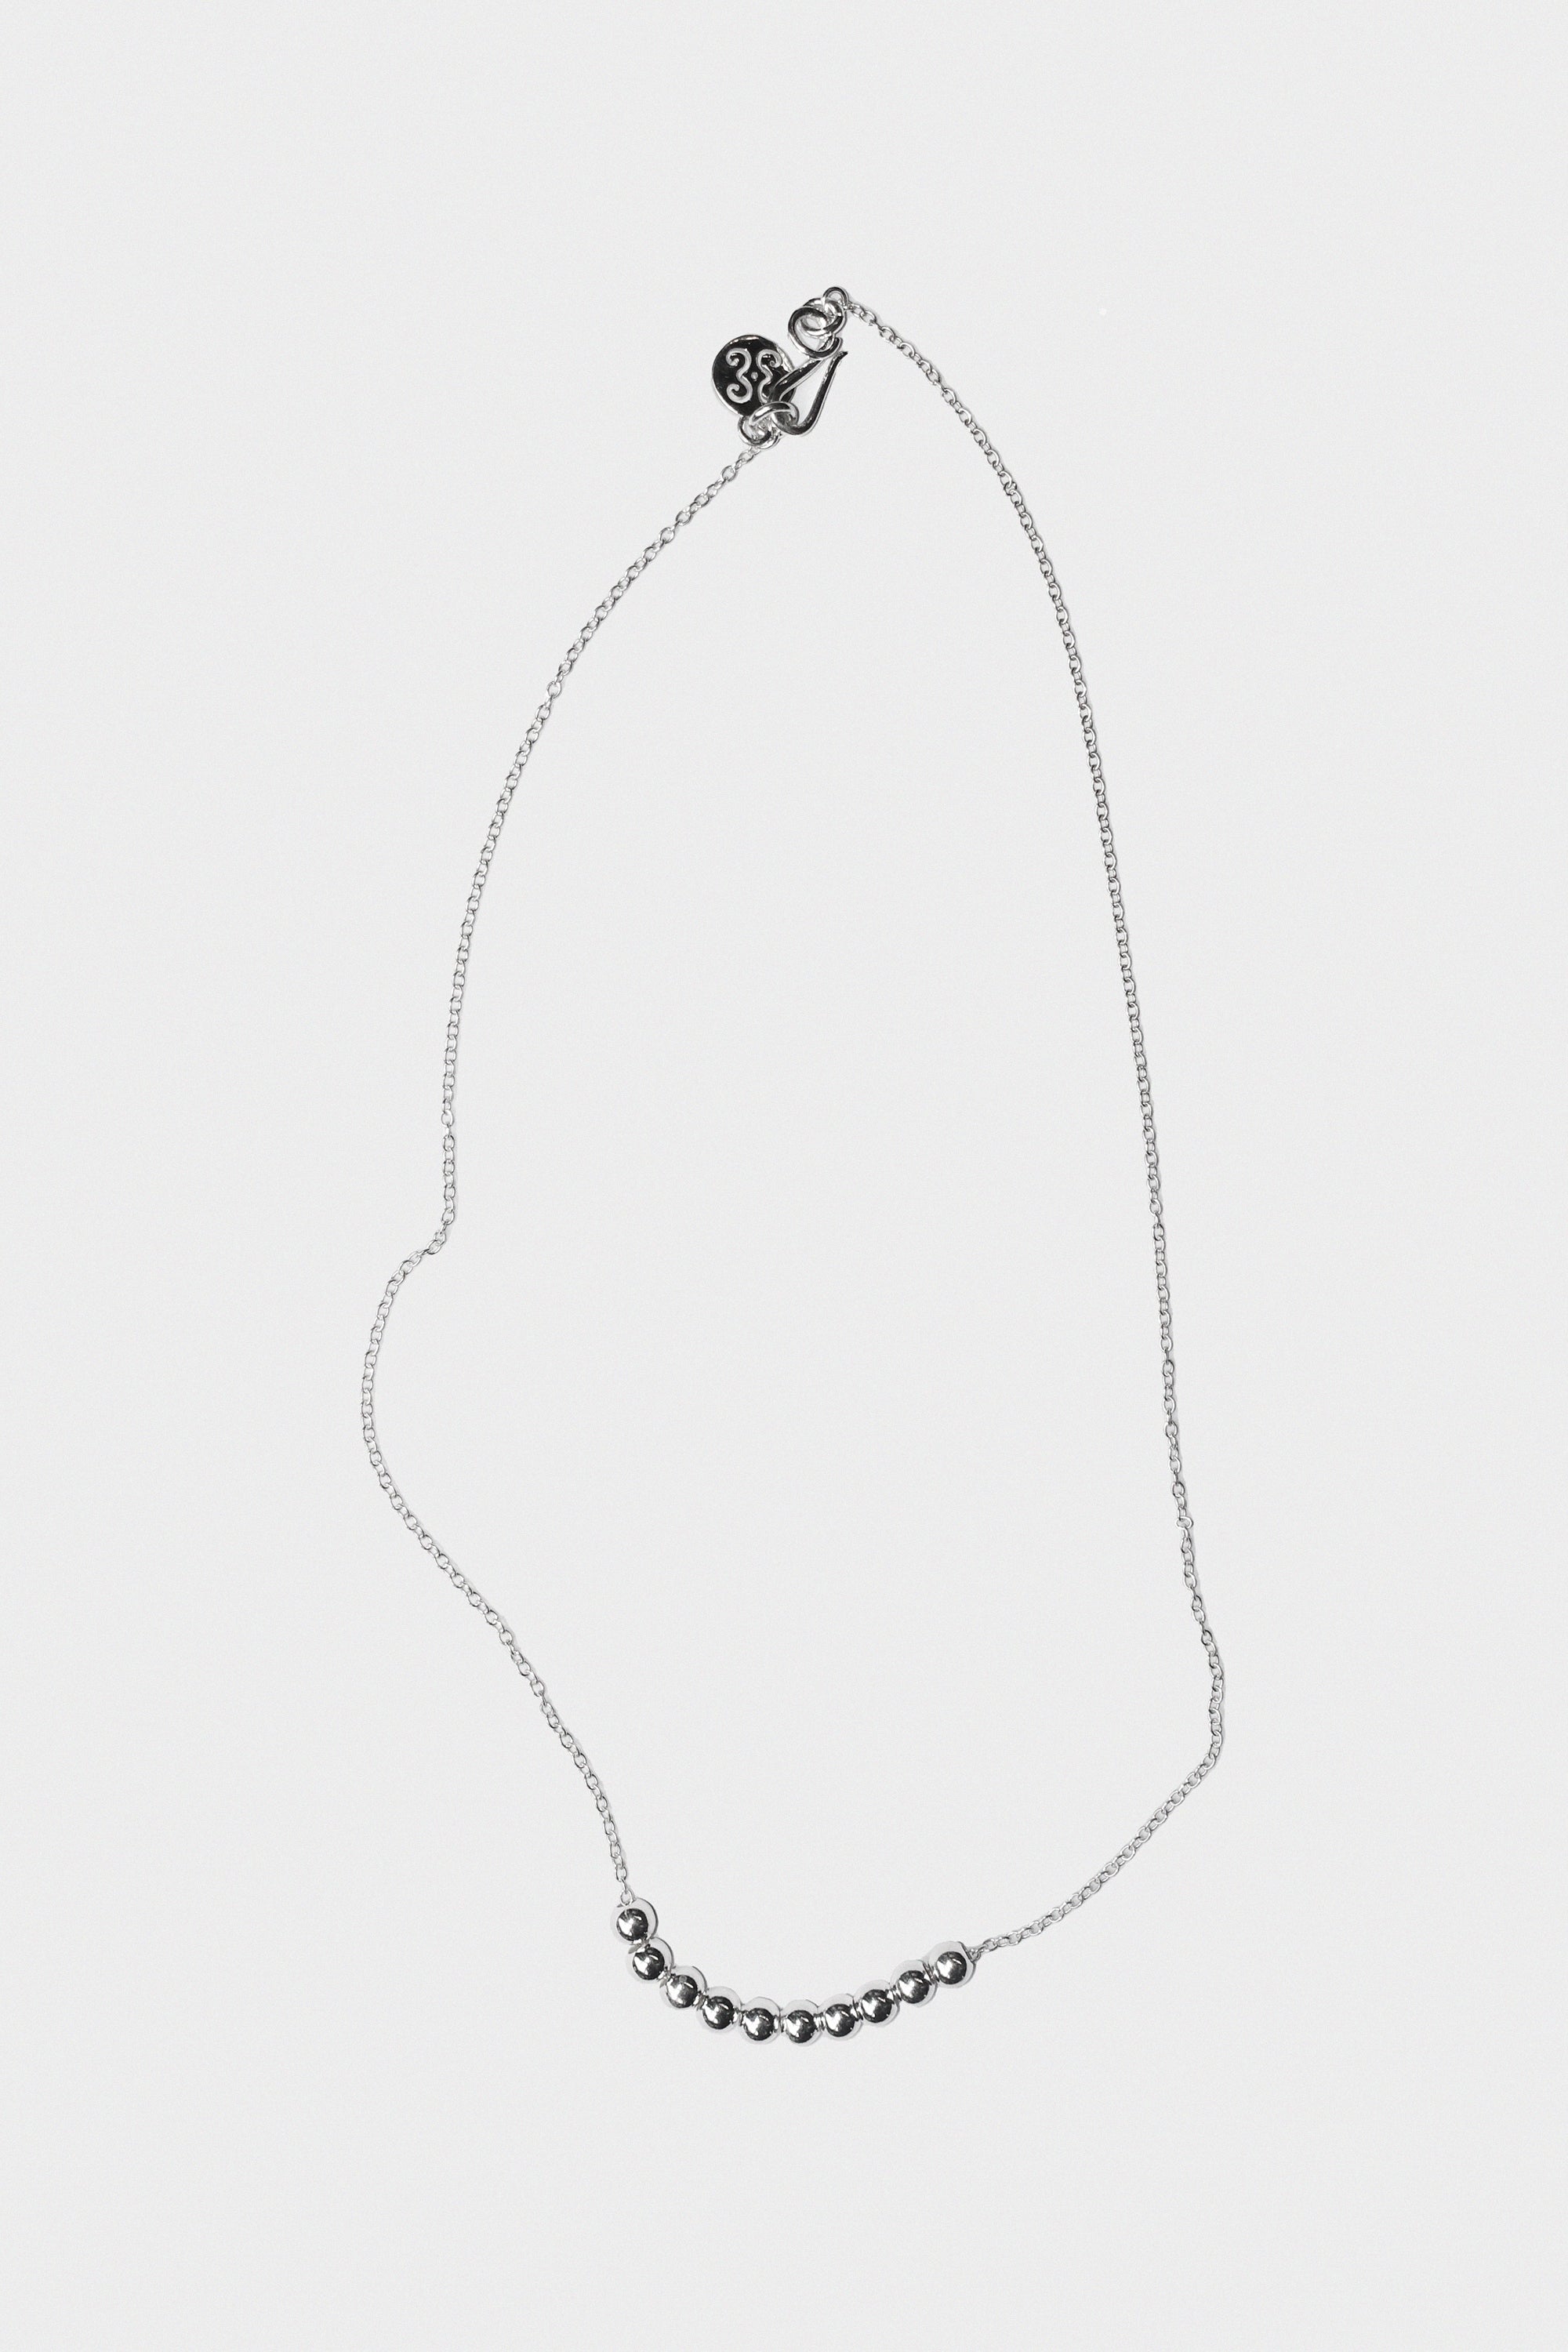 Solar Chain Necklace in Sterling Silver by Sapir Bachar